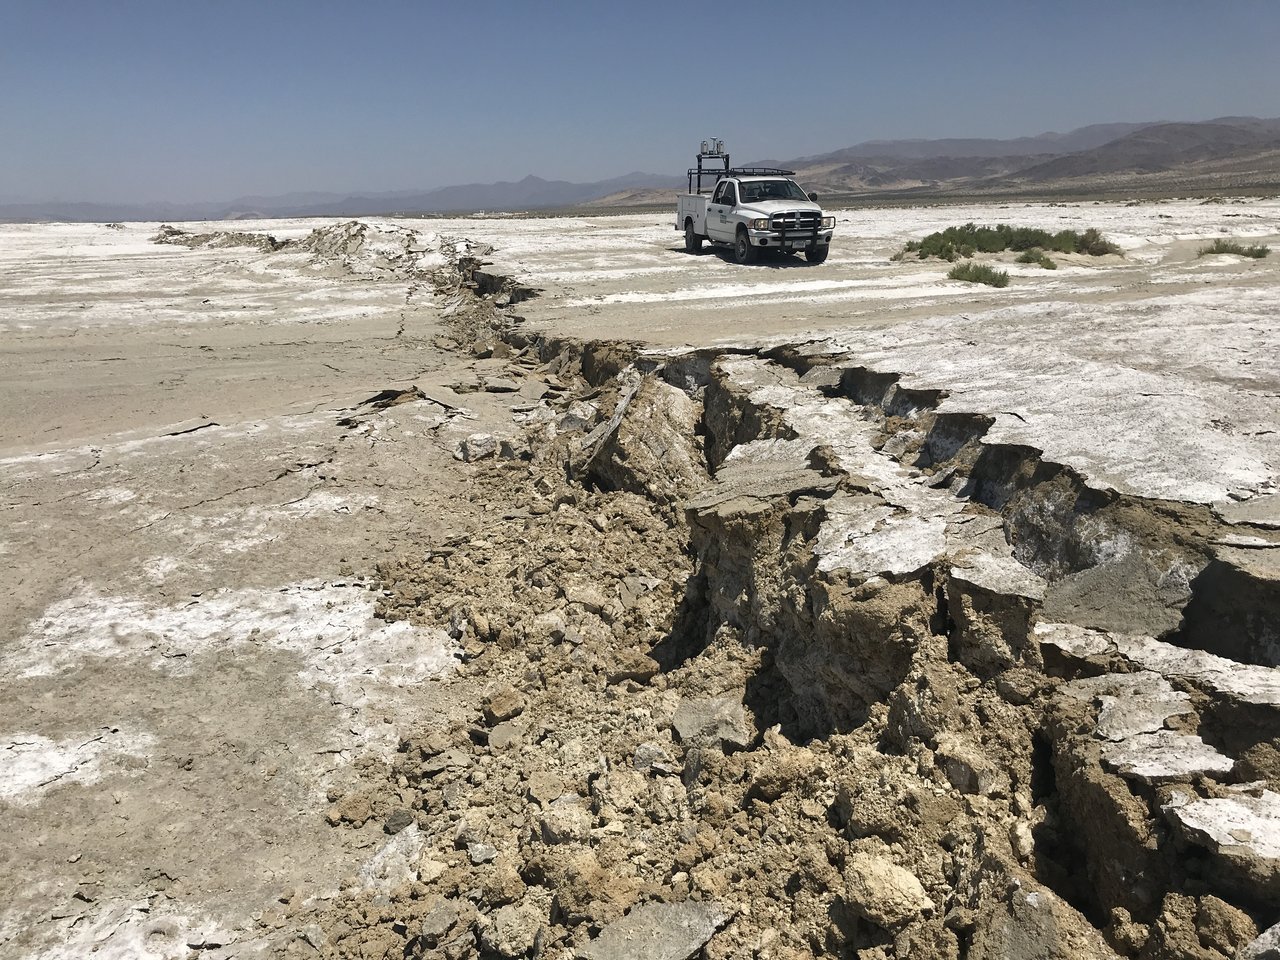 A USGS Earthquake Science Center Mobile Laser Scanning truck scans the surface rupture near the zone of maximum surface displacement of the magnitude 7.1 Searles Valley earthquake that struck the Ridgecrest, California area. Credit: USGS / Ben Brooks